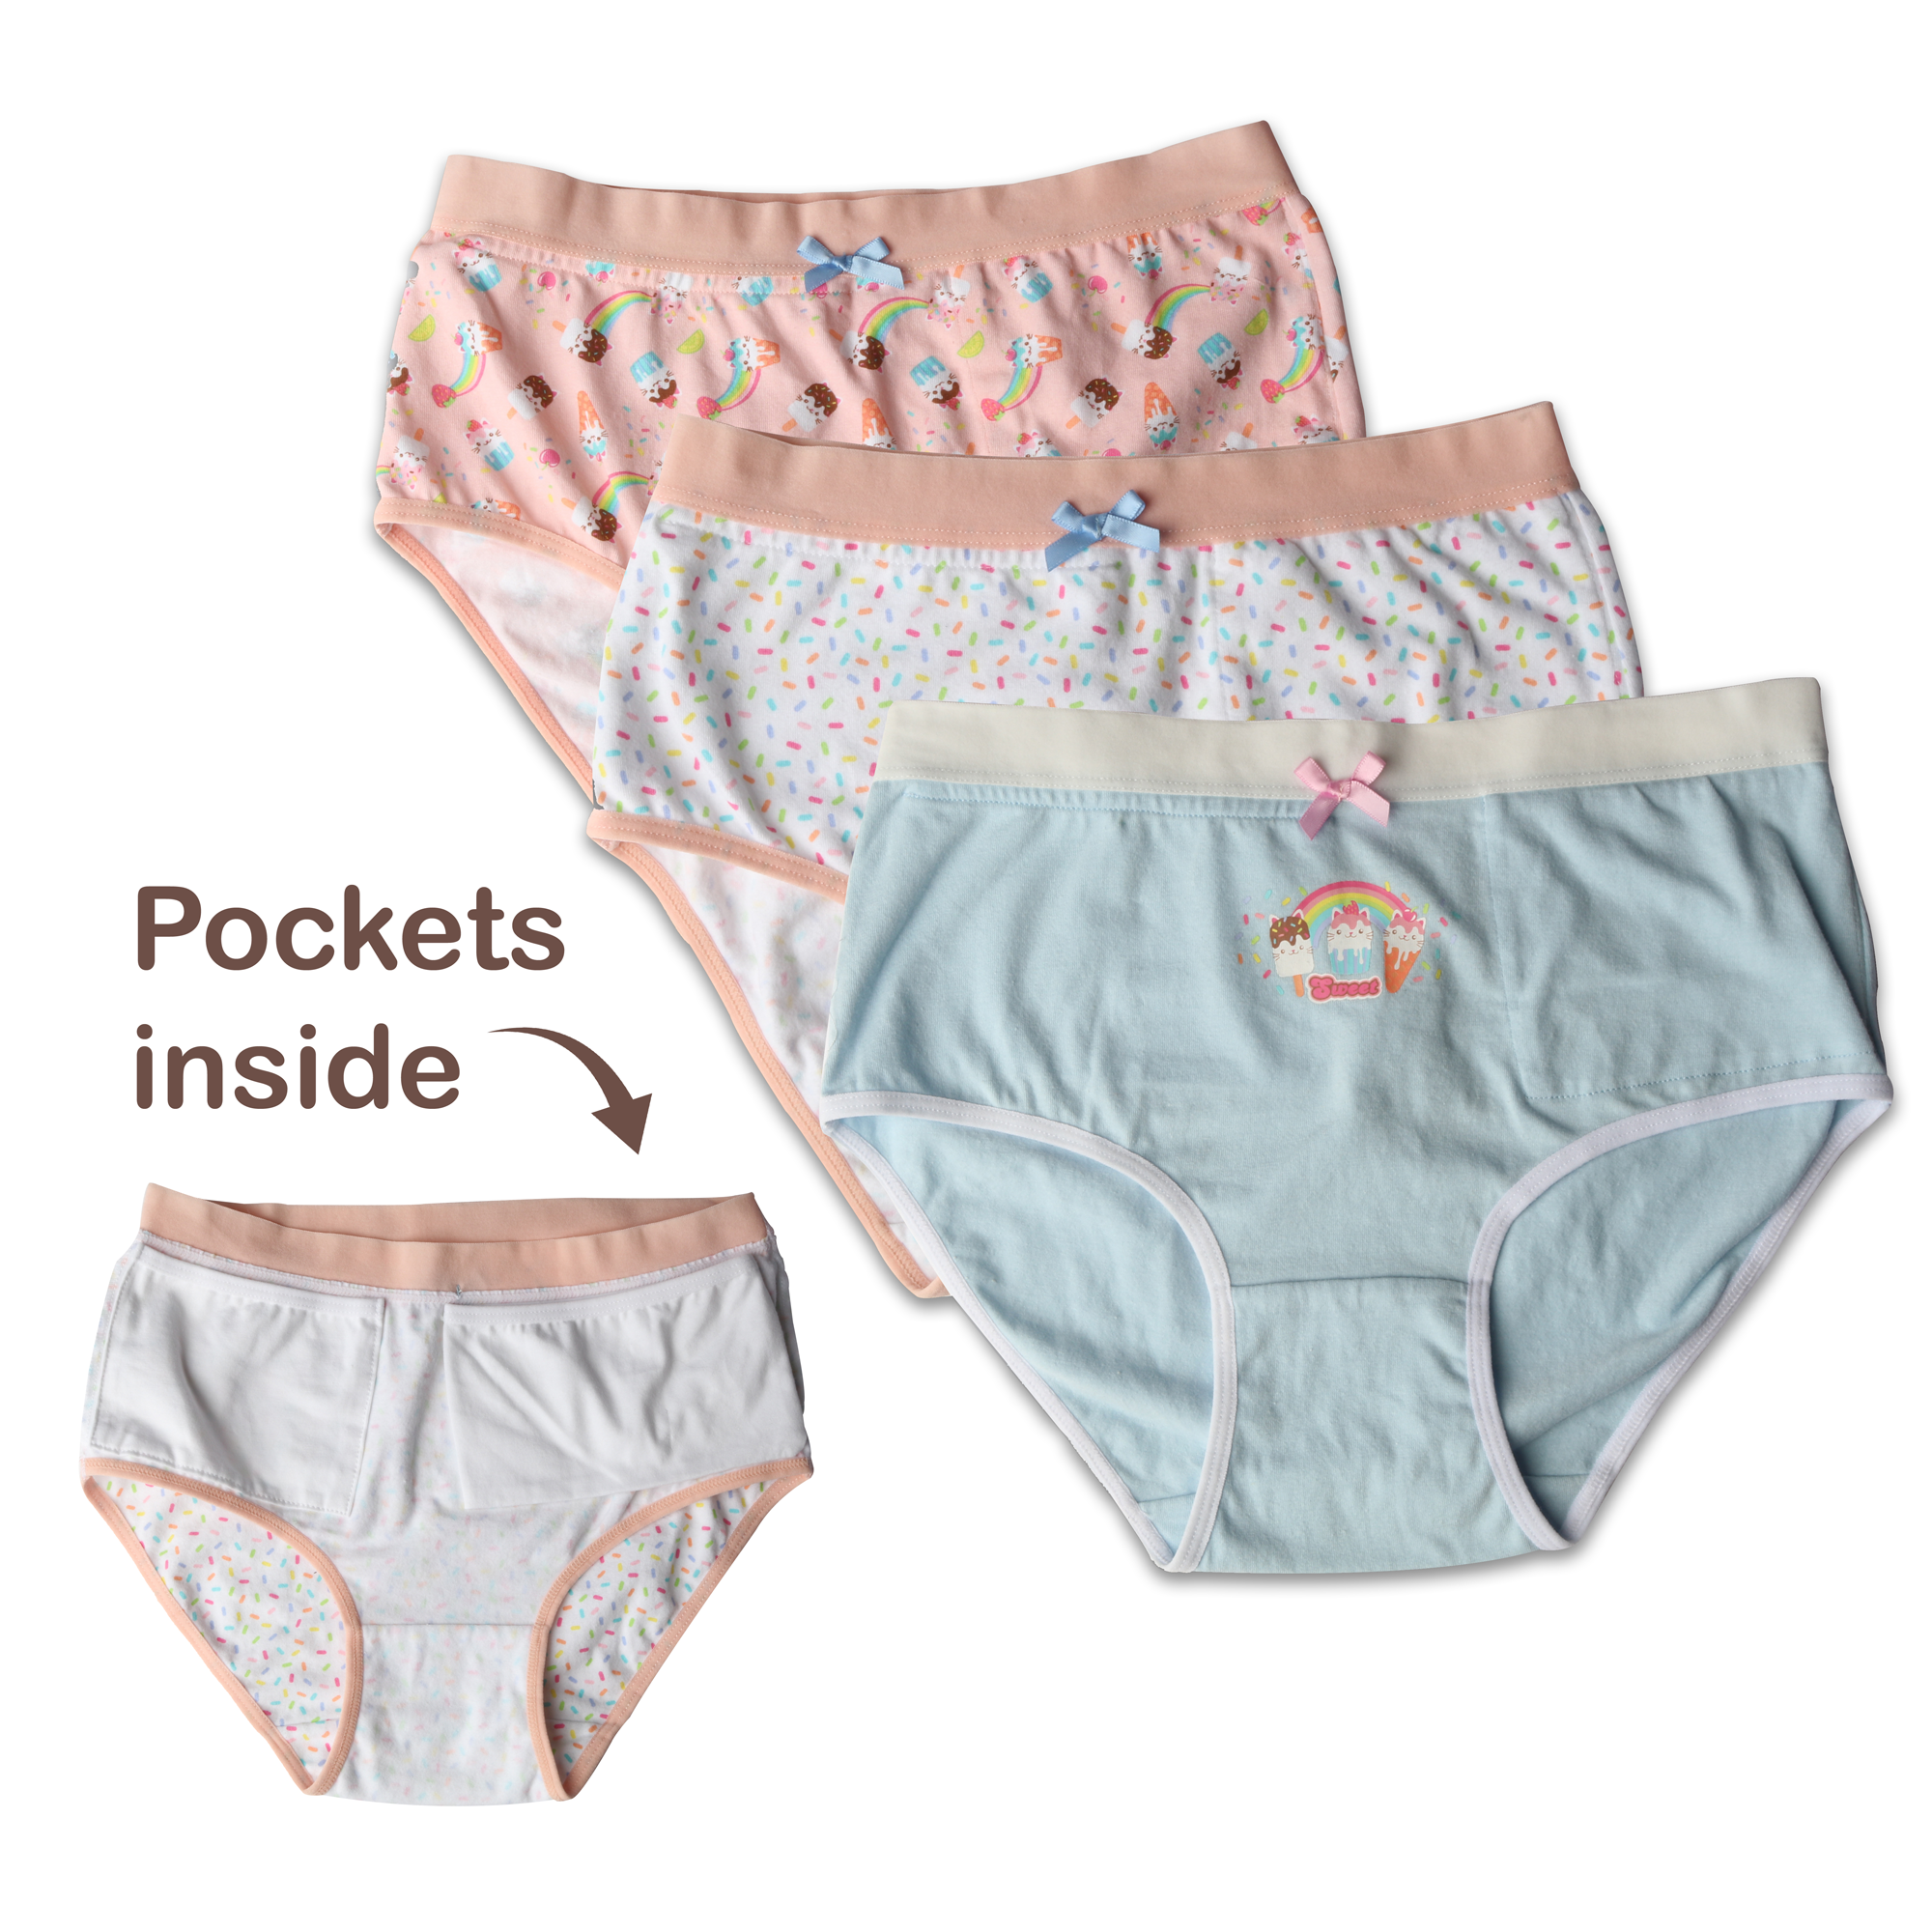 My Private Pocket Underwear for Girls - Variety 3 Pack - Bedwetting Store